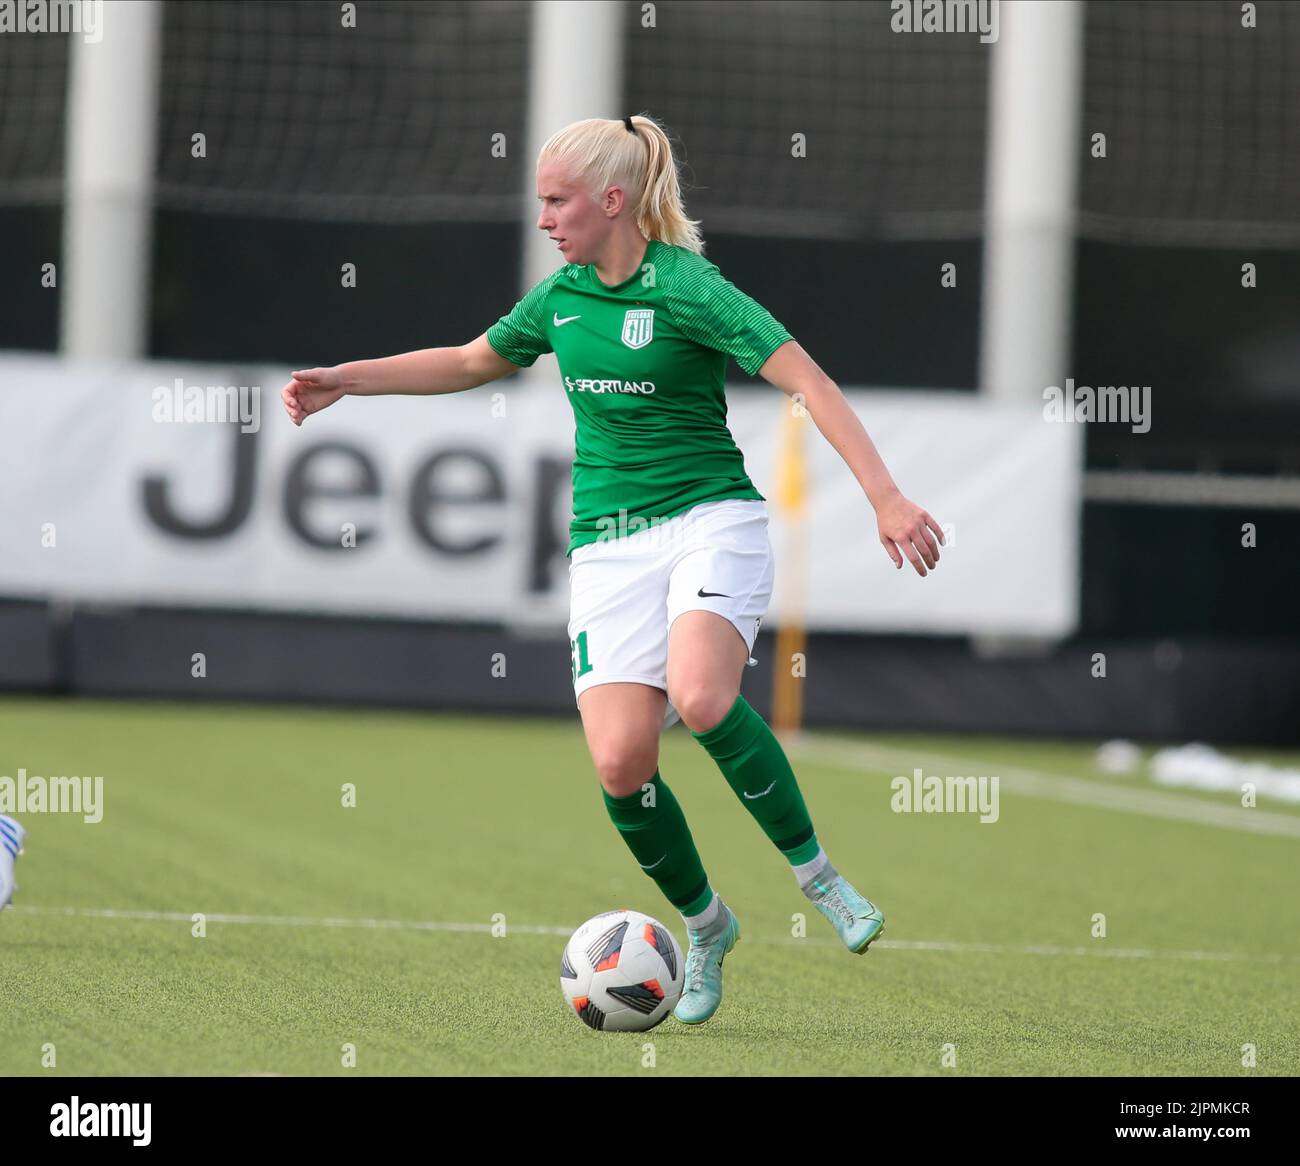 Vinovo, Italy. 18th Aug, 2022. Getter Saar of Tallinna Fc Flora during the match Tallin Fc Flora and Fc qiryat of the first qualifying round of the Uefa Womenâ&#x80;&#x99;s Champions League on August 18, 2022 at Juventus Training Ground, Turin, Italy. Photo Nderim Kaceli Credit: Independent Photo Agency/Alamy Live News Stock Photo